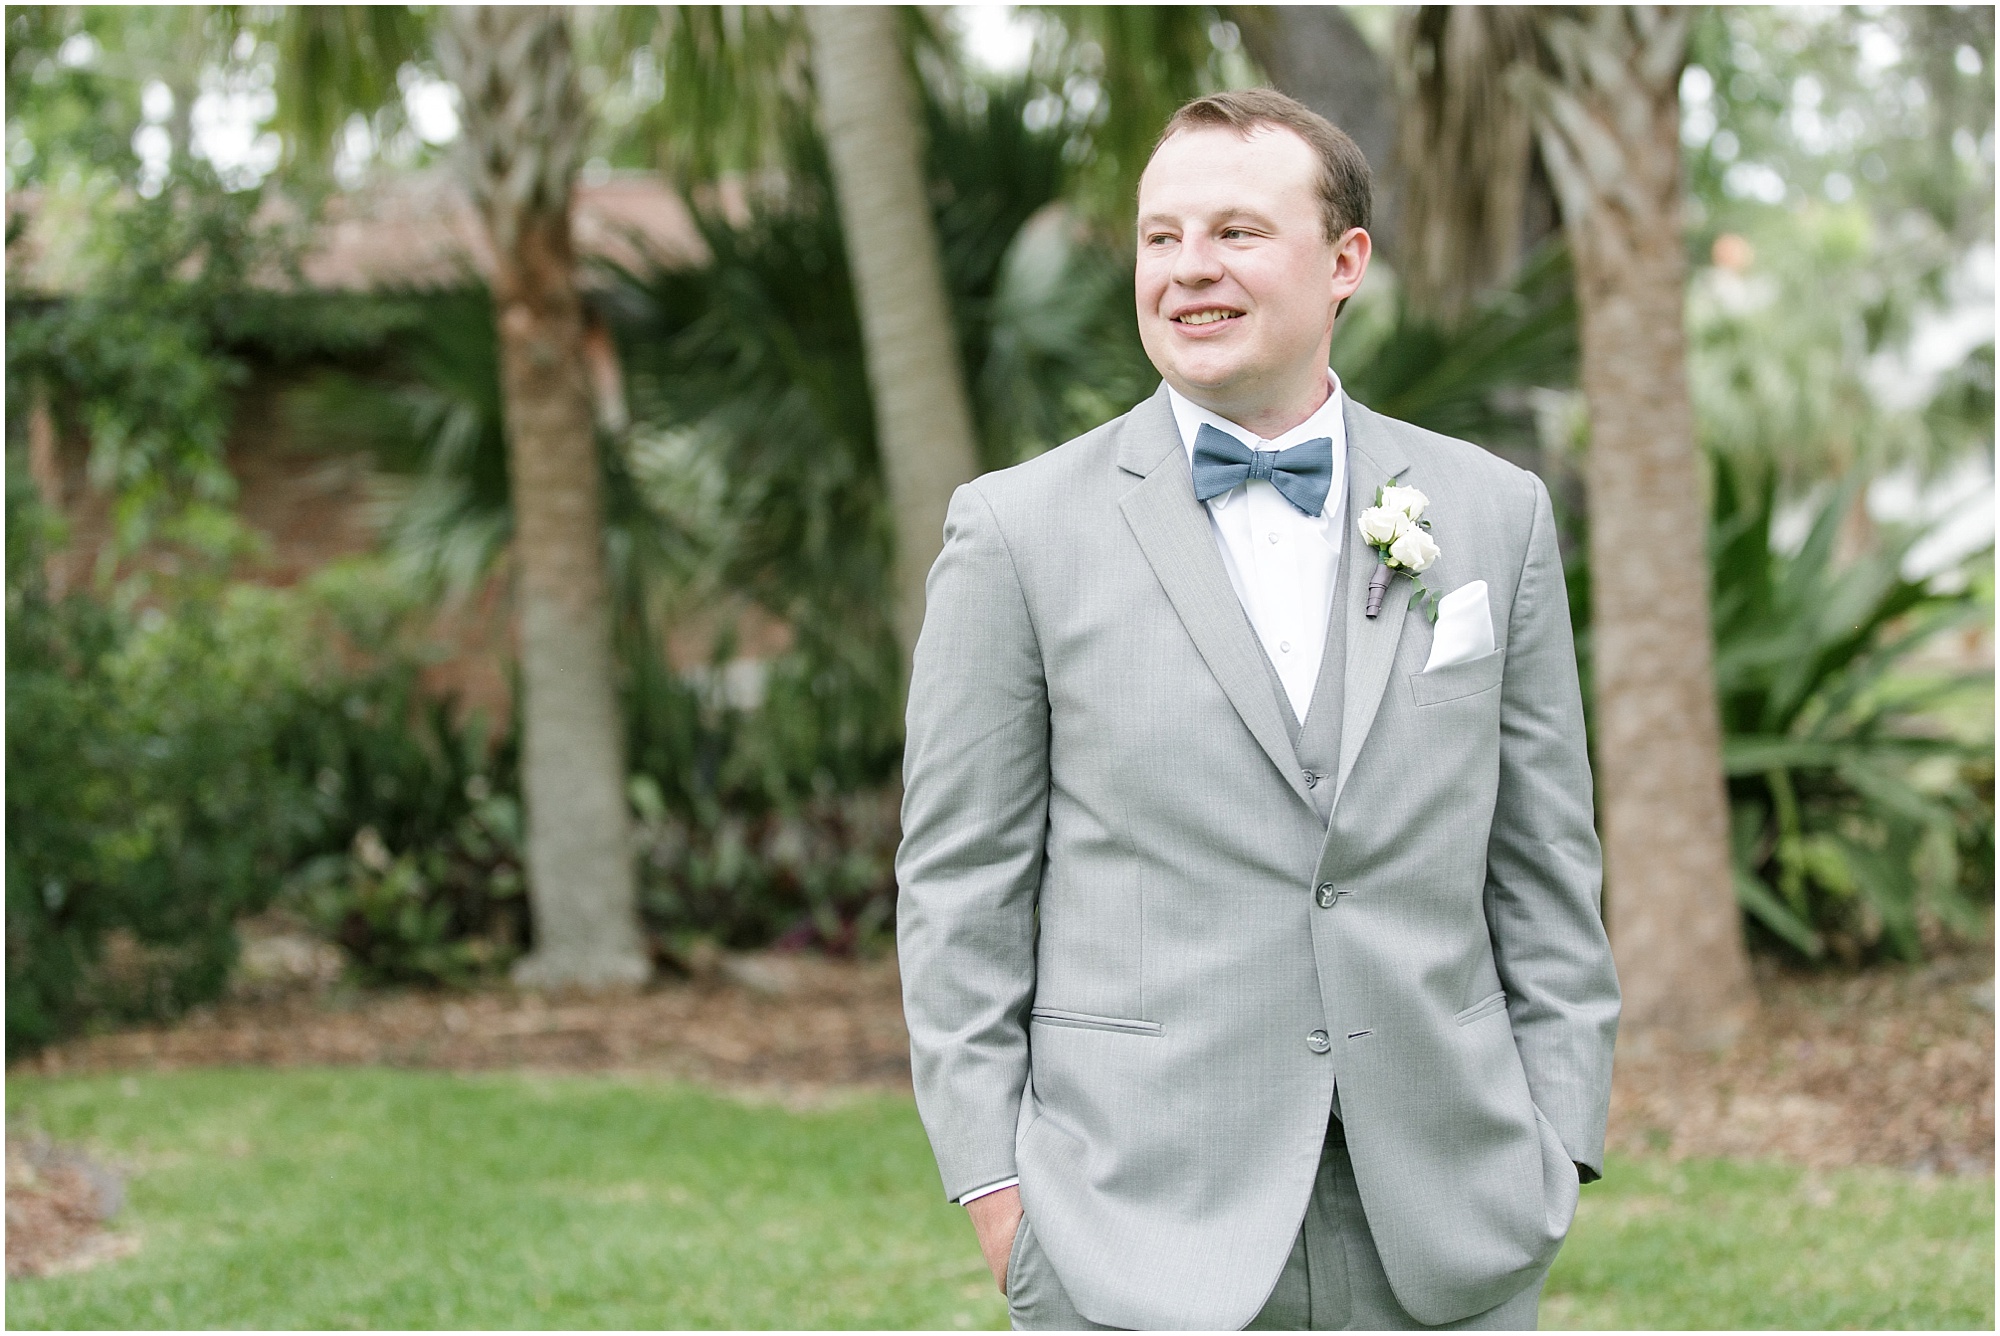 Groom standing among trees at wedding venue in Central Florida.